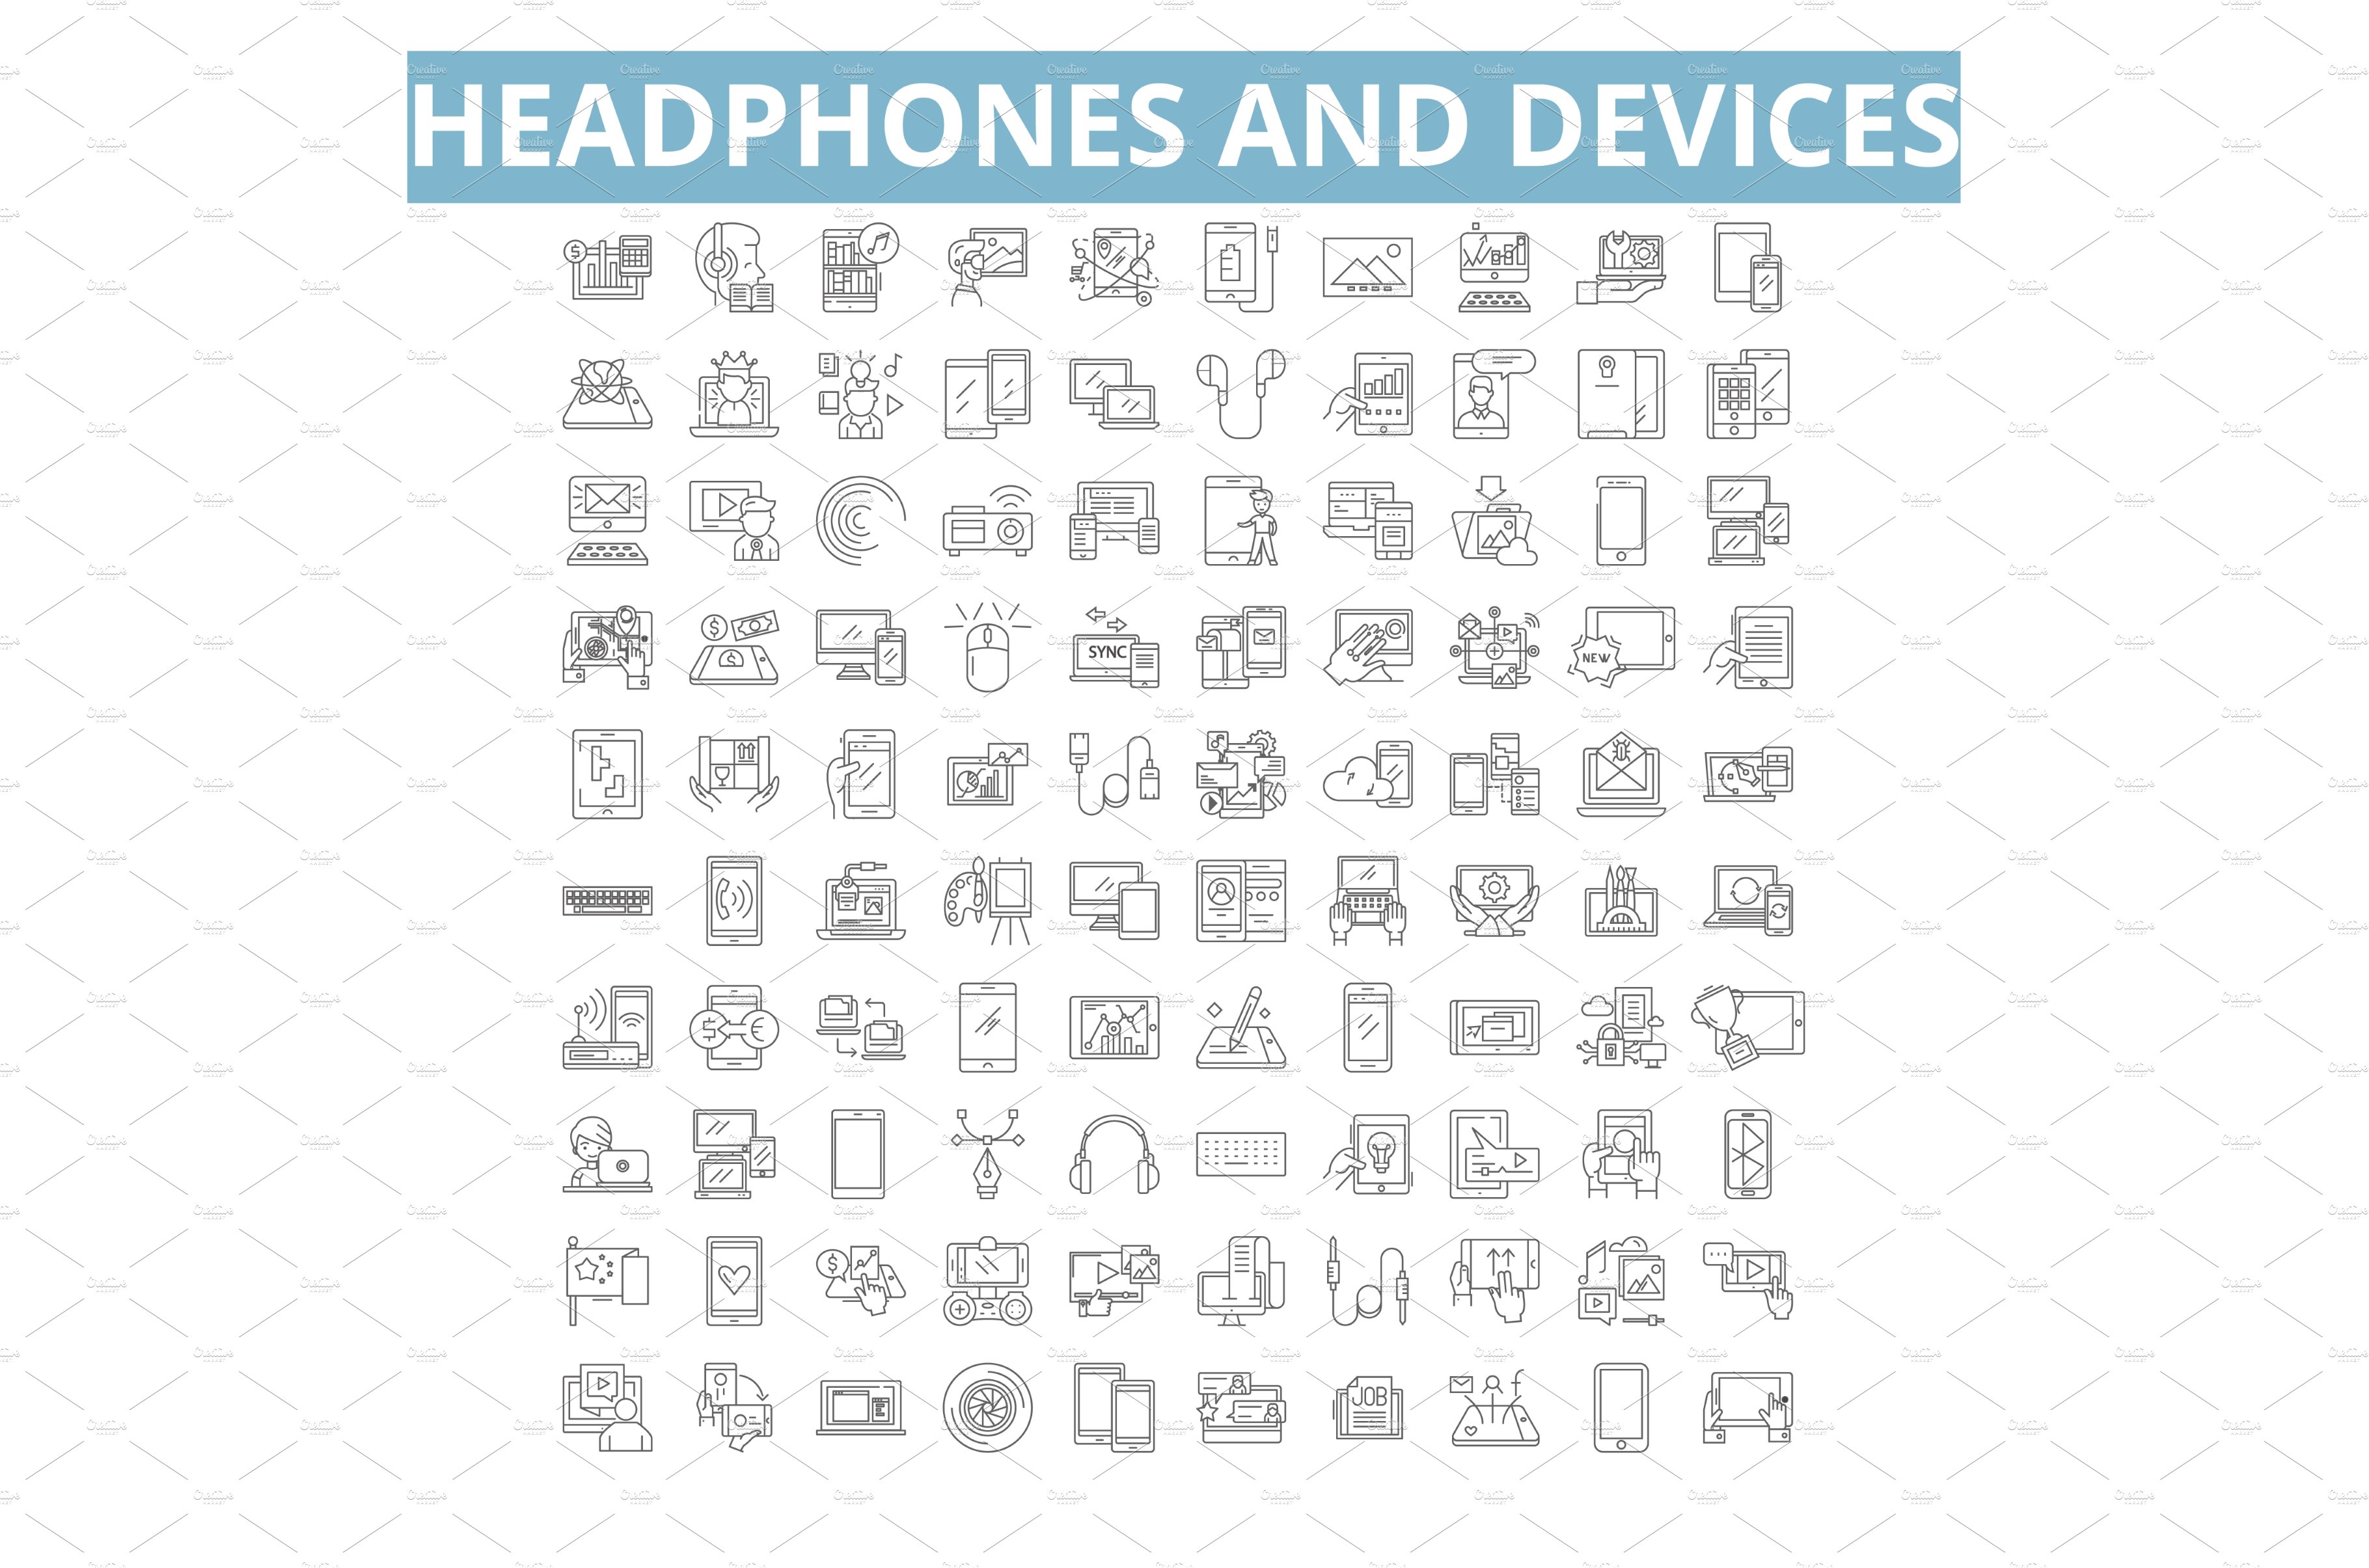 Headphones and devices icons, line cover image.